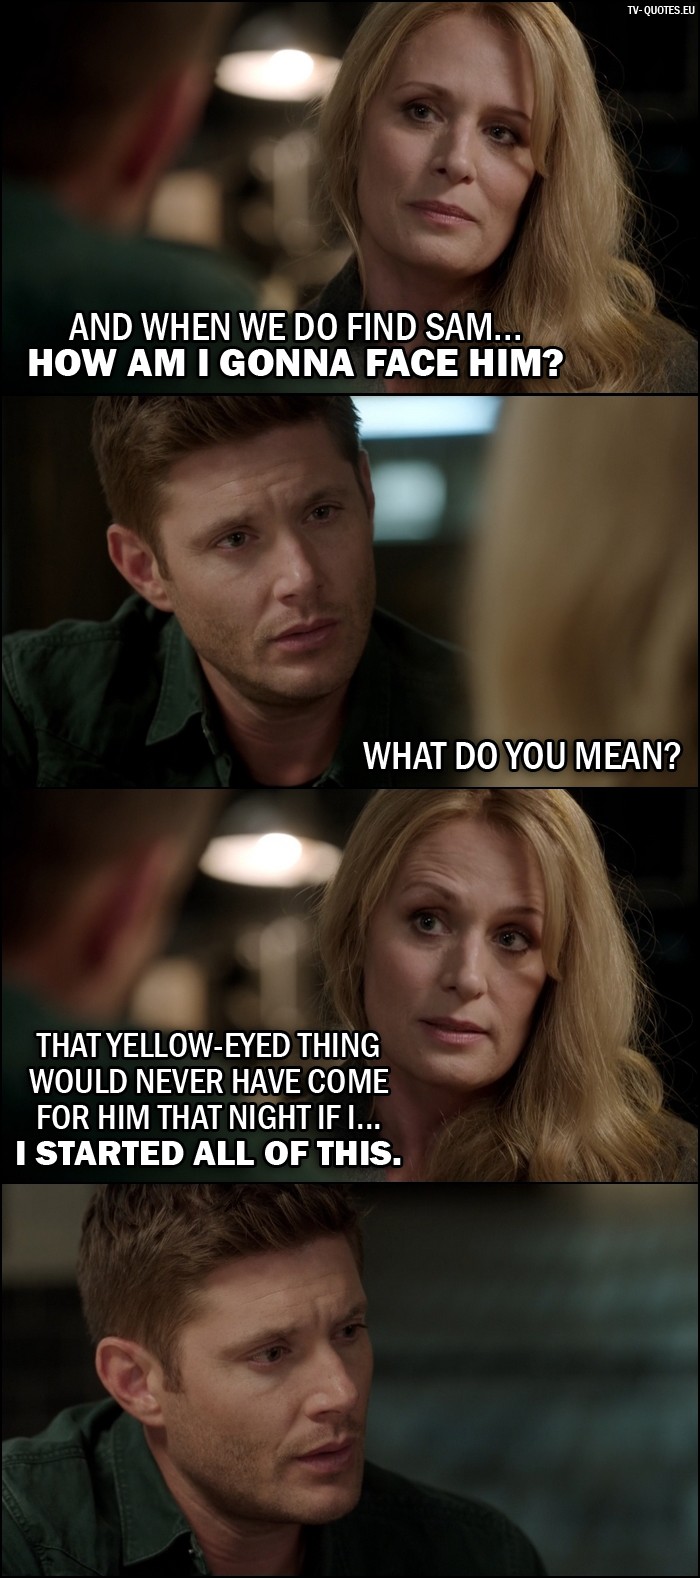 Supernatural quote from 12x02 - Mary Winchester: And when we do find Sam... how am I gonna face him? Dean Winchester: What do you mean? Mary Winchester: That yellow-eyed thing would never have come for him that night if I... I started all of this.